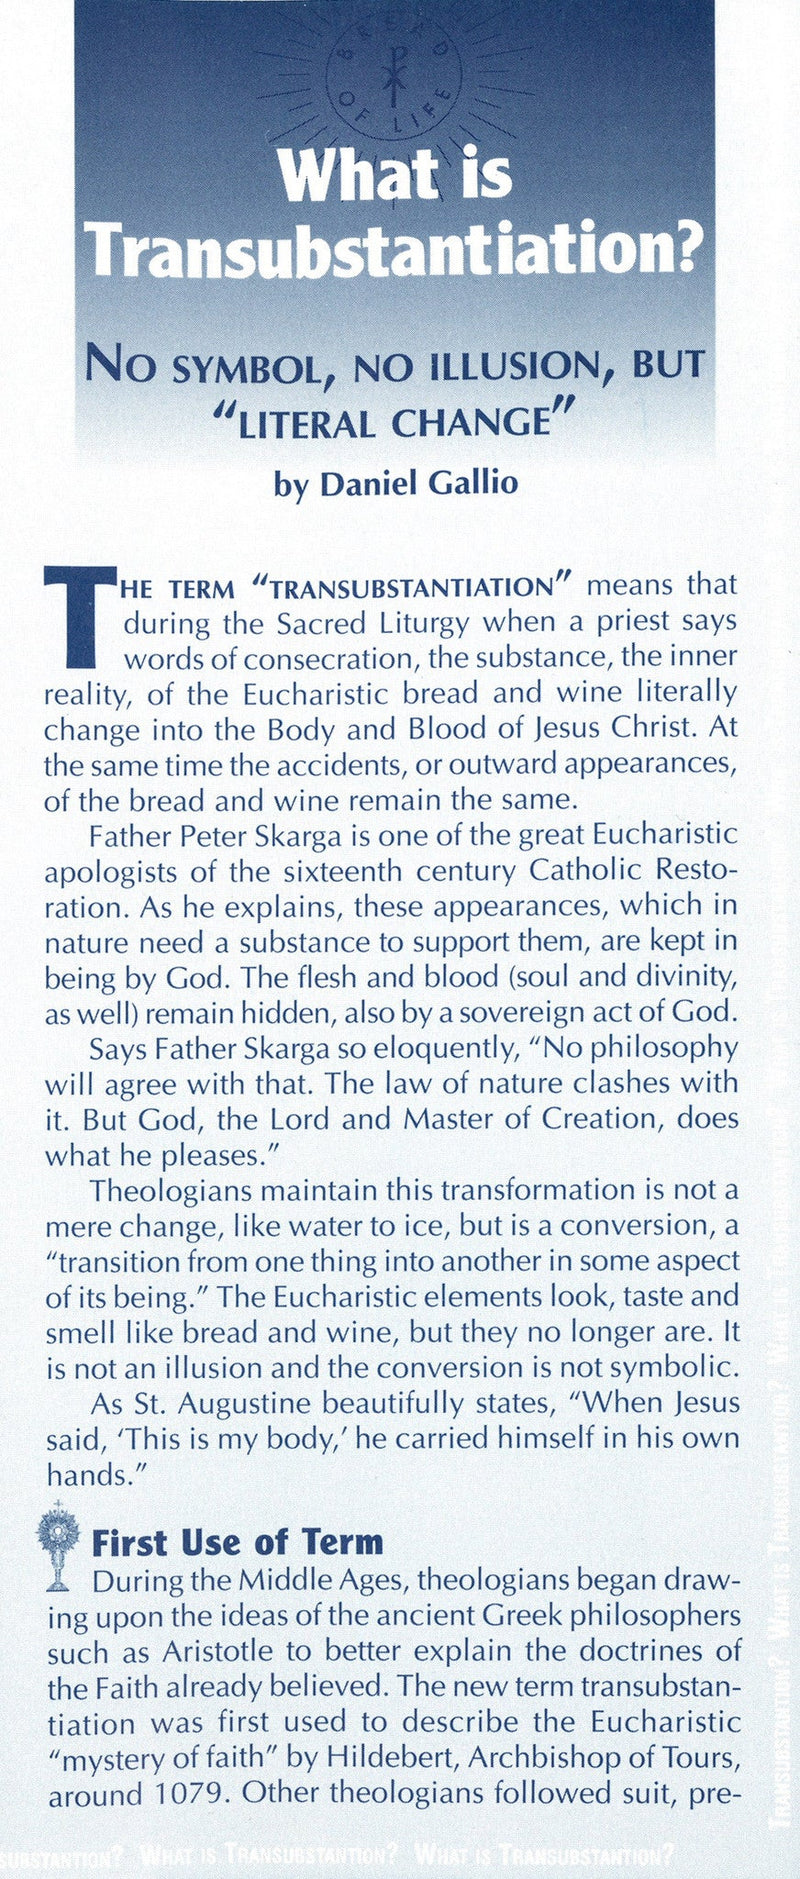 WHAT IS TRANSUBSTANTIATION